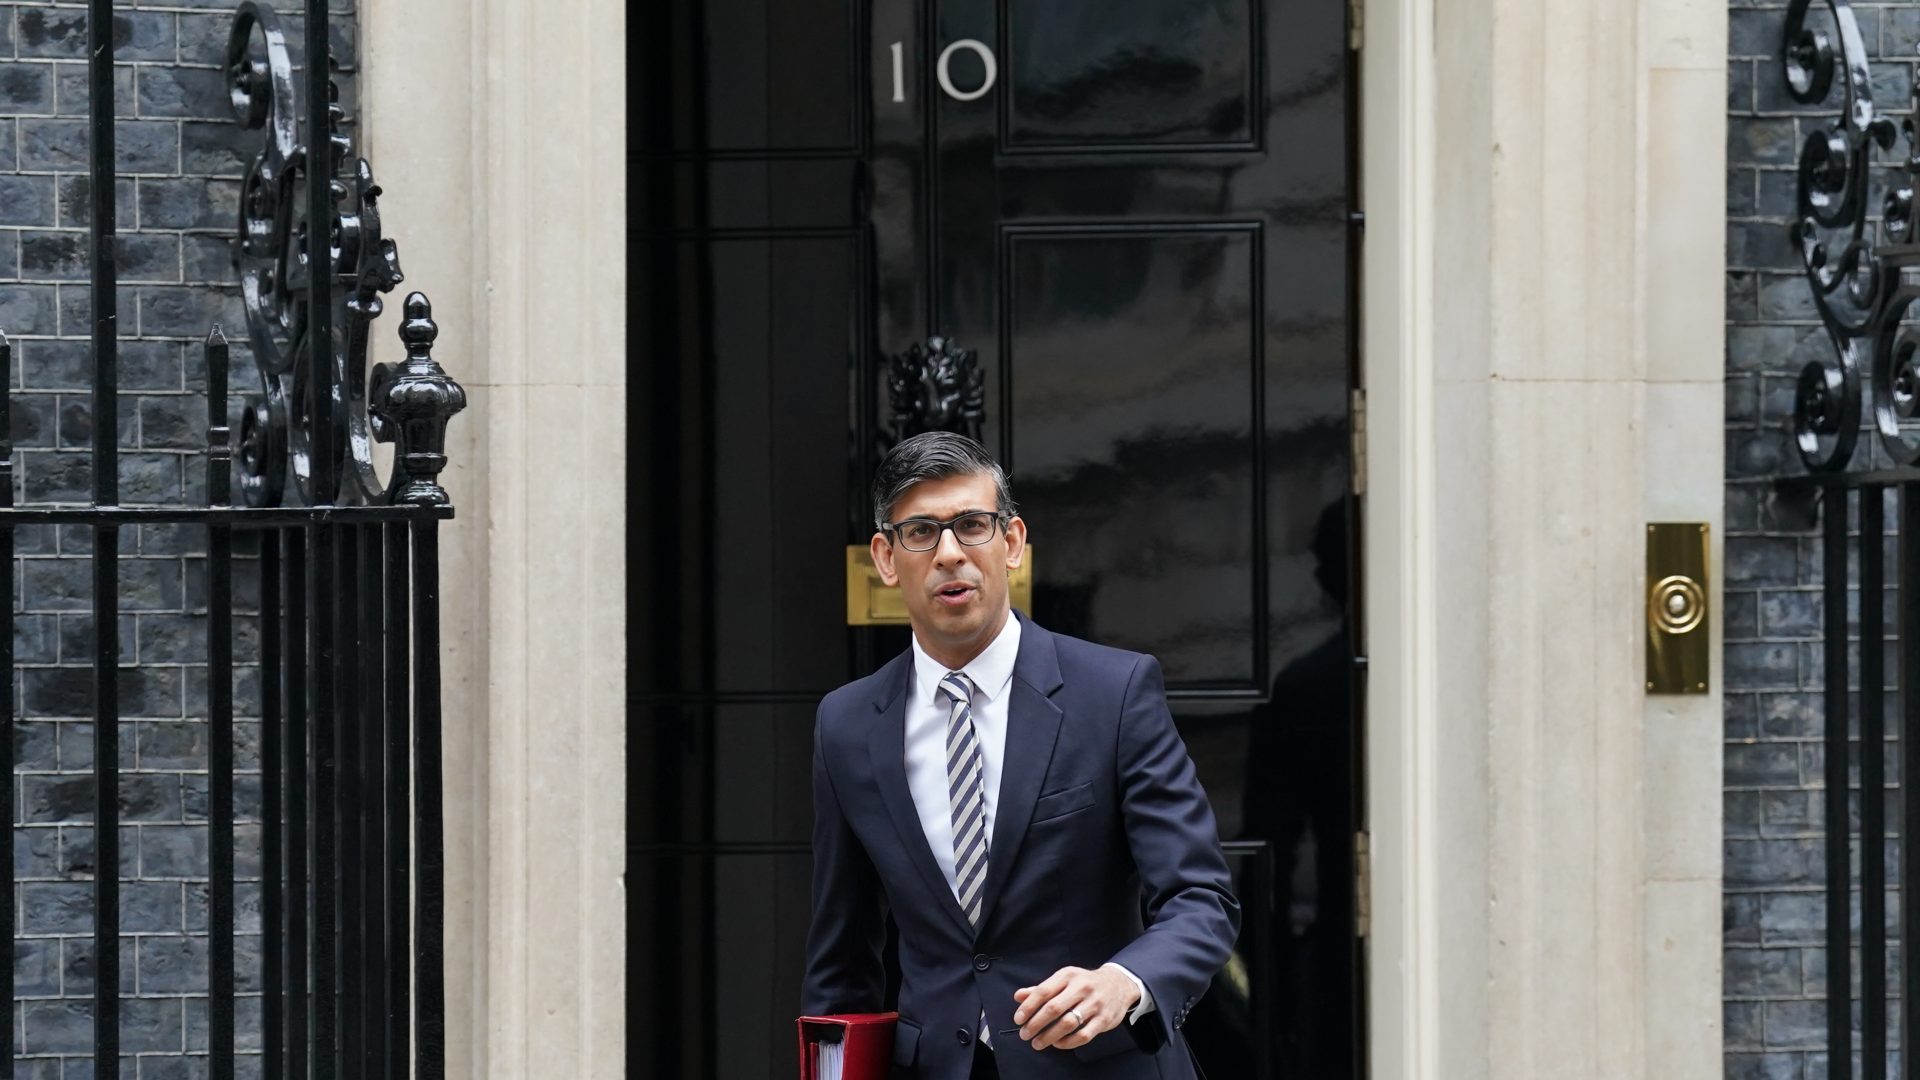 Prime Minister Rishi Sunak departs 10 Downing Street, London, to attend Prime Minister's Questions. Photo: Stefan Rousseau/PA Wire/PA Images